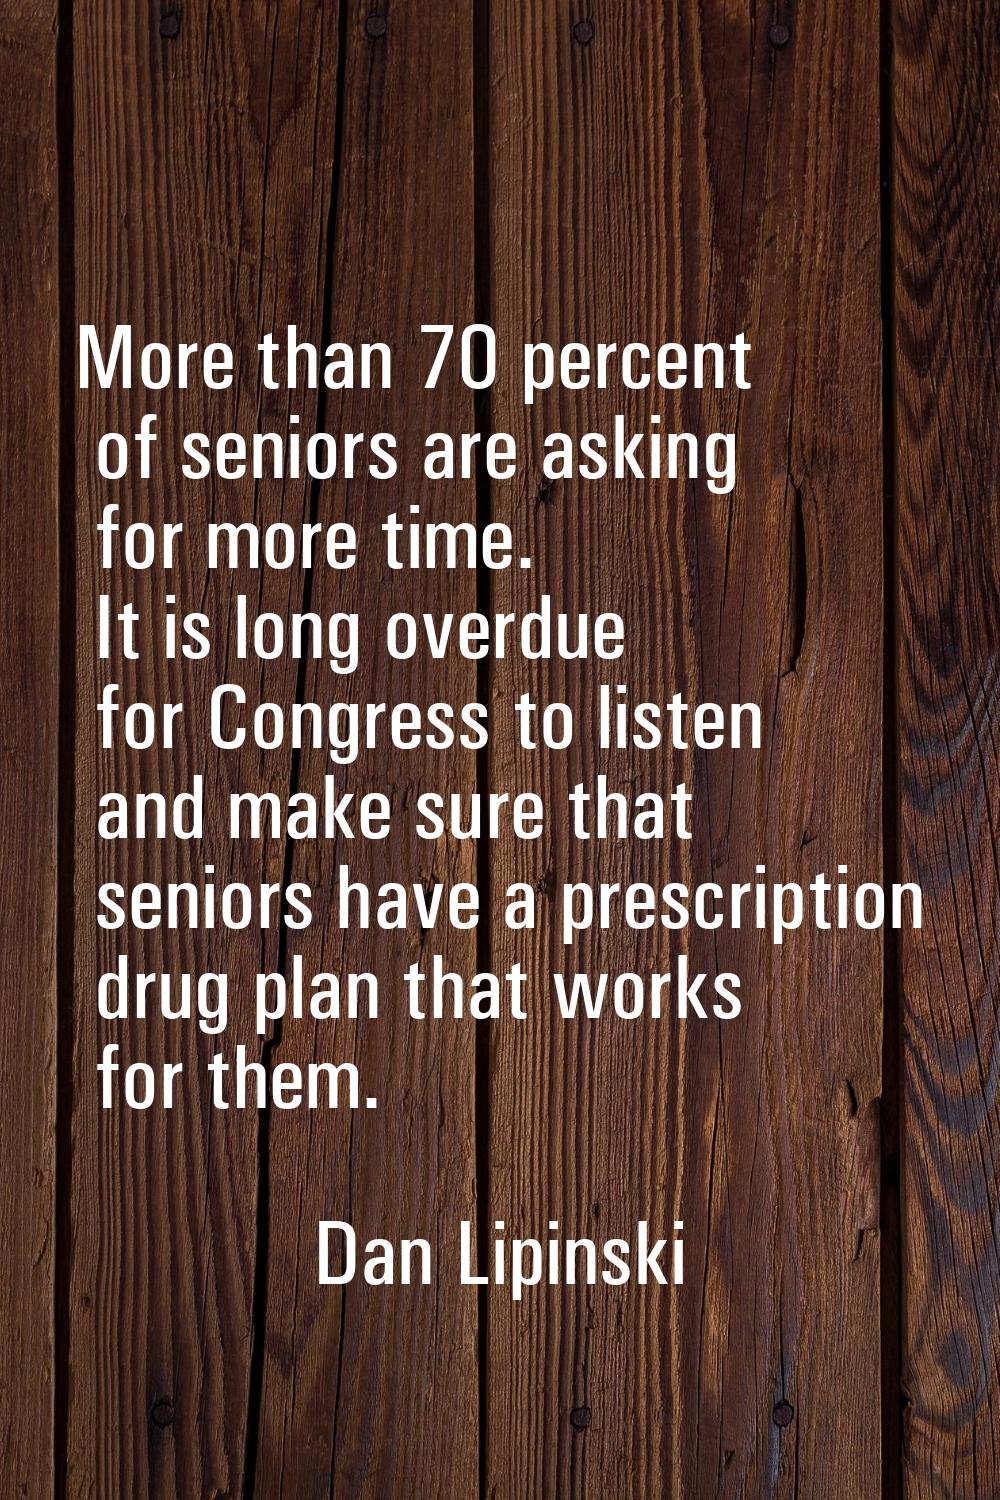 More than 70 percent of seniors are asking for more time. It is long overdue for Congress to listen